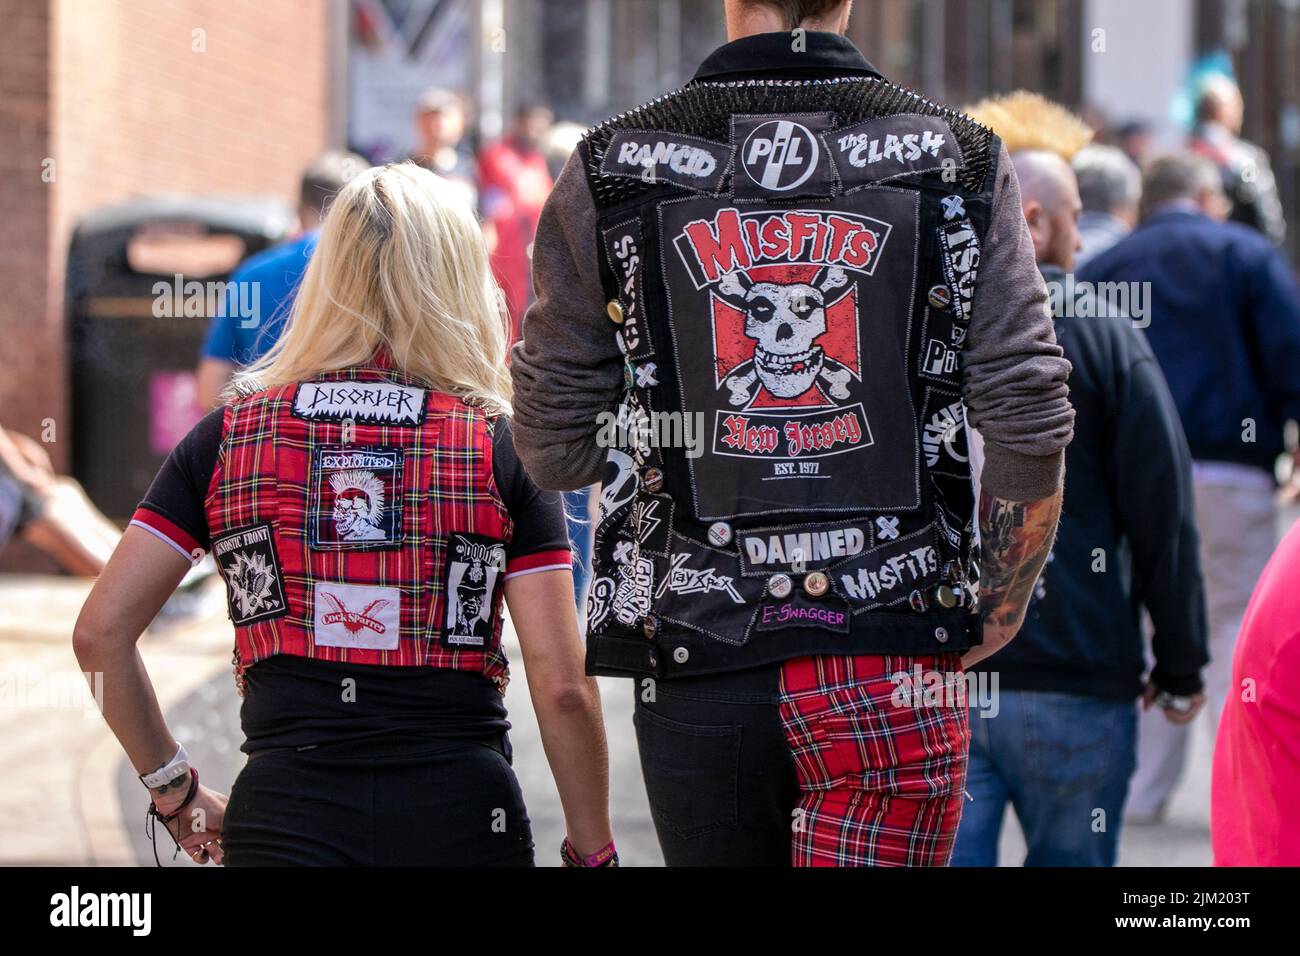 Blackpool Lancashire Uk 4th Aug 2022 The Punk Subculture Ideologies Fashion With Mohican